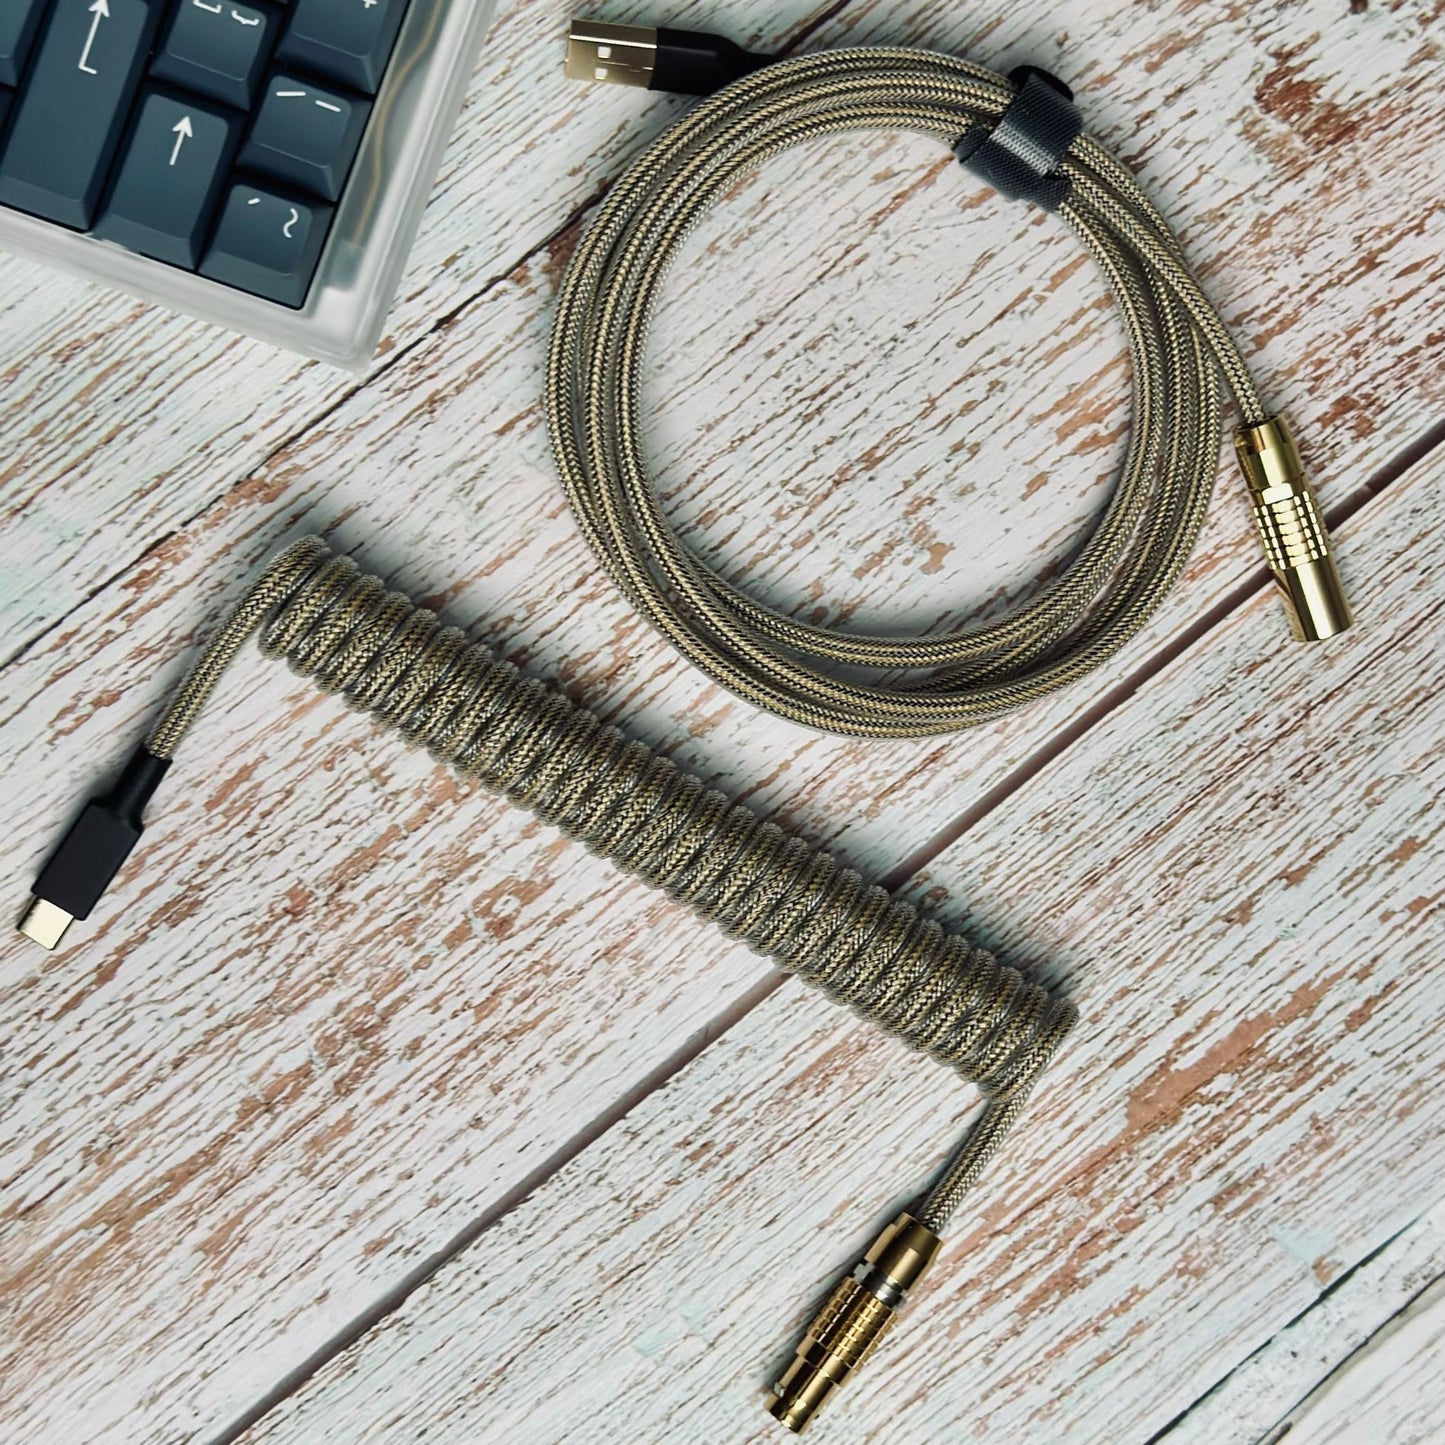 Birds eye view of coiled mechanical keyboard cable. Teleios Fusion black and gold sleeving, gold FEMO 1B push/pull connector, clear TechFlex second layer, gold USB A and USB C connectors with black heat-shrink tubing, and bundled with a black Velcro tie. 